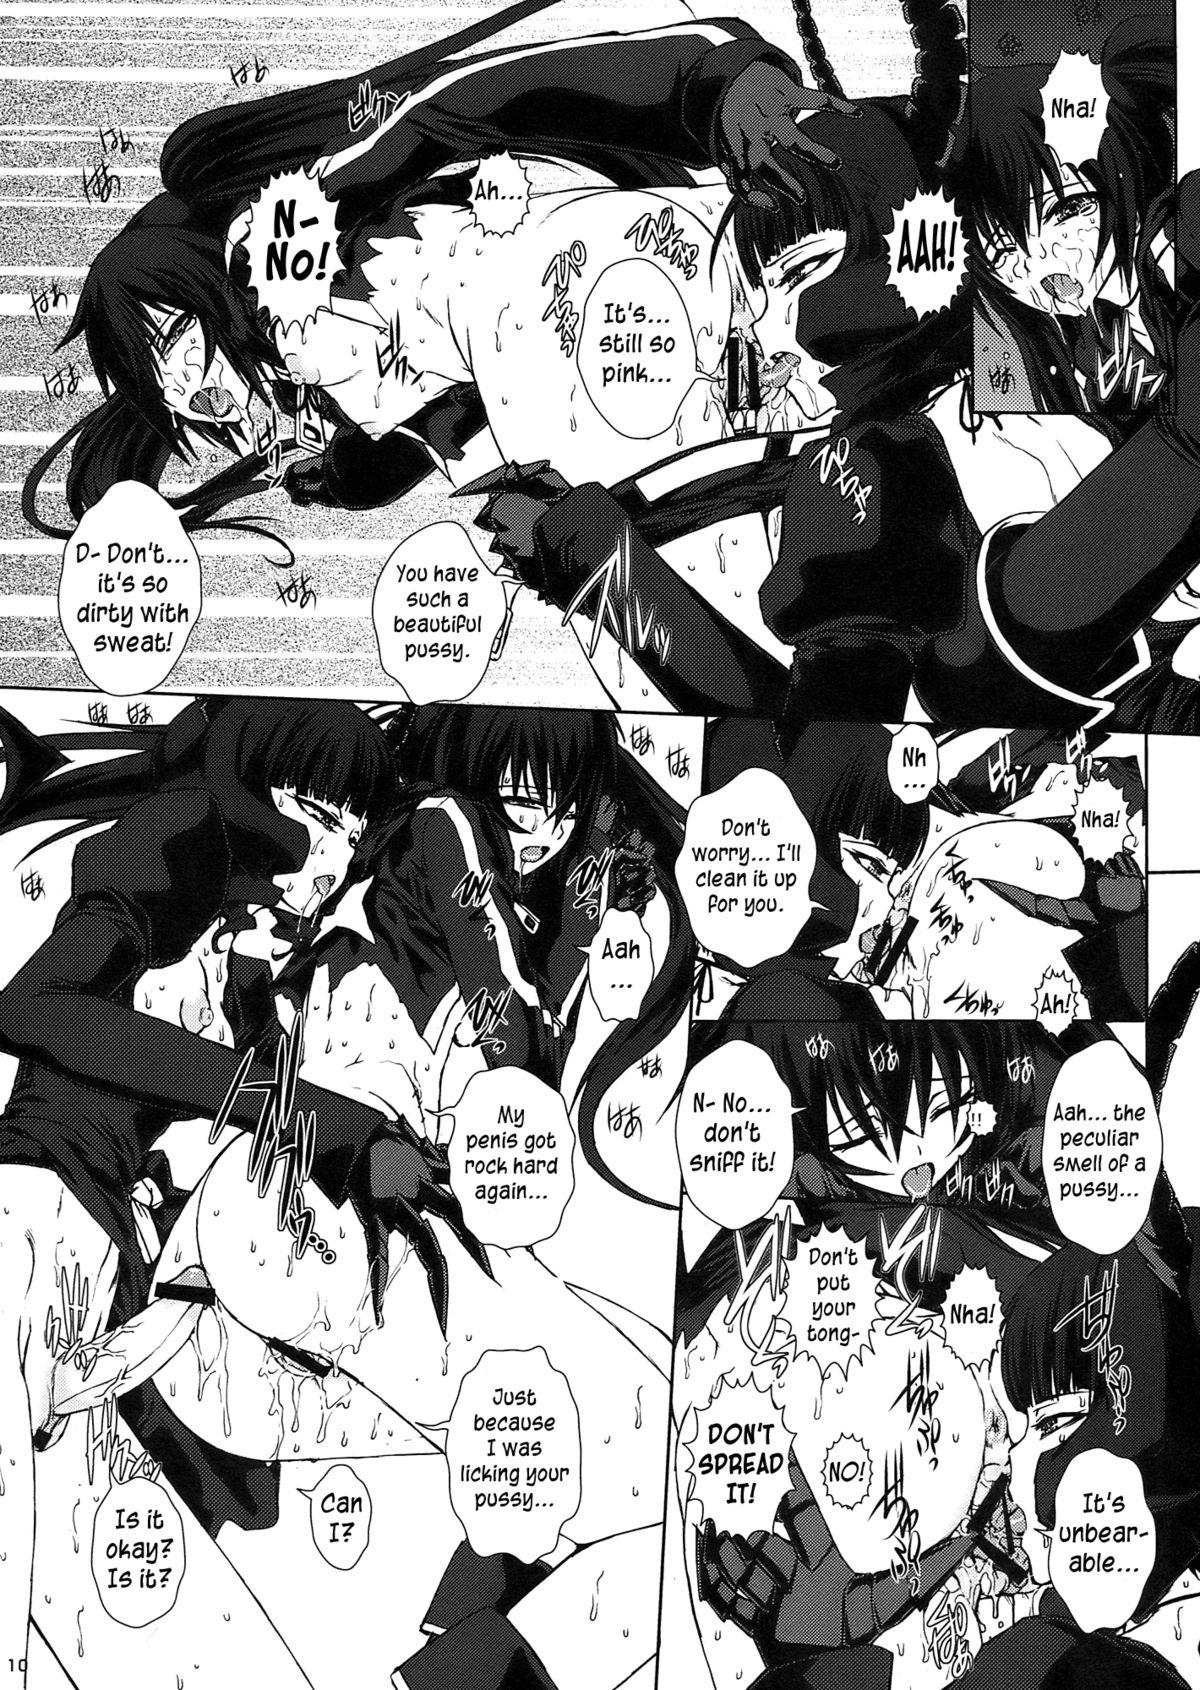 Classic B★RS SAND! - Black rock shooter Dick Sucking Porn - Page 12